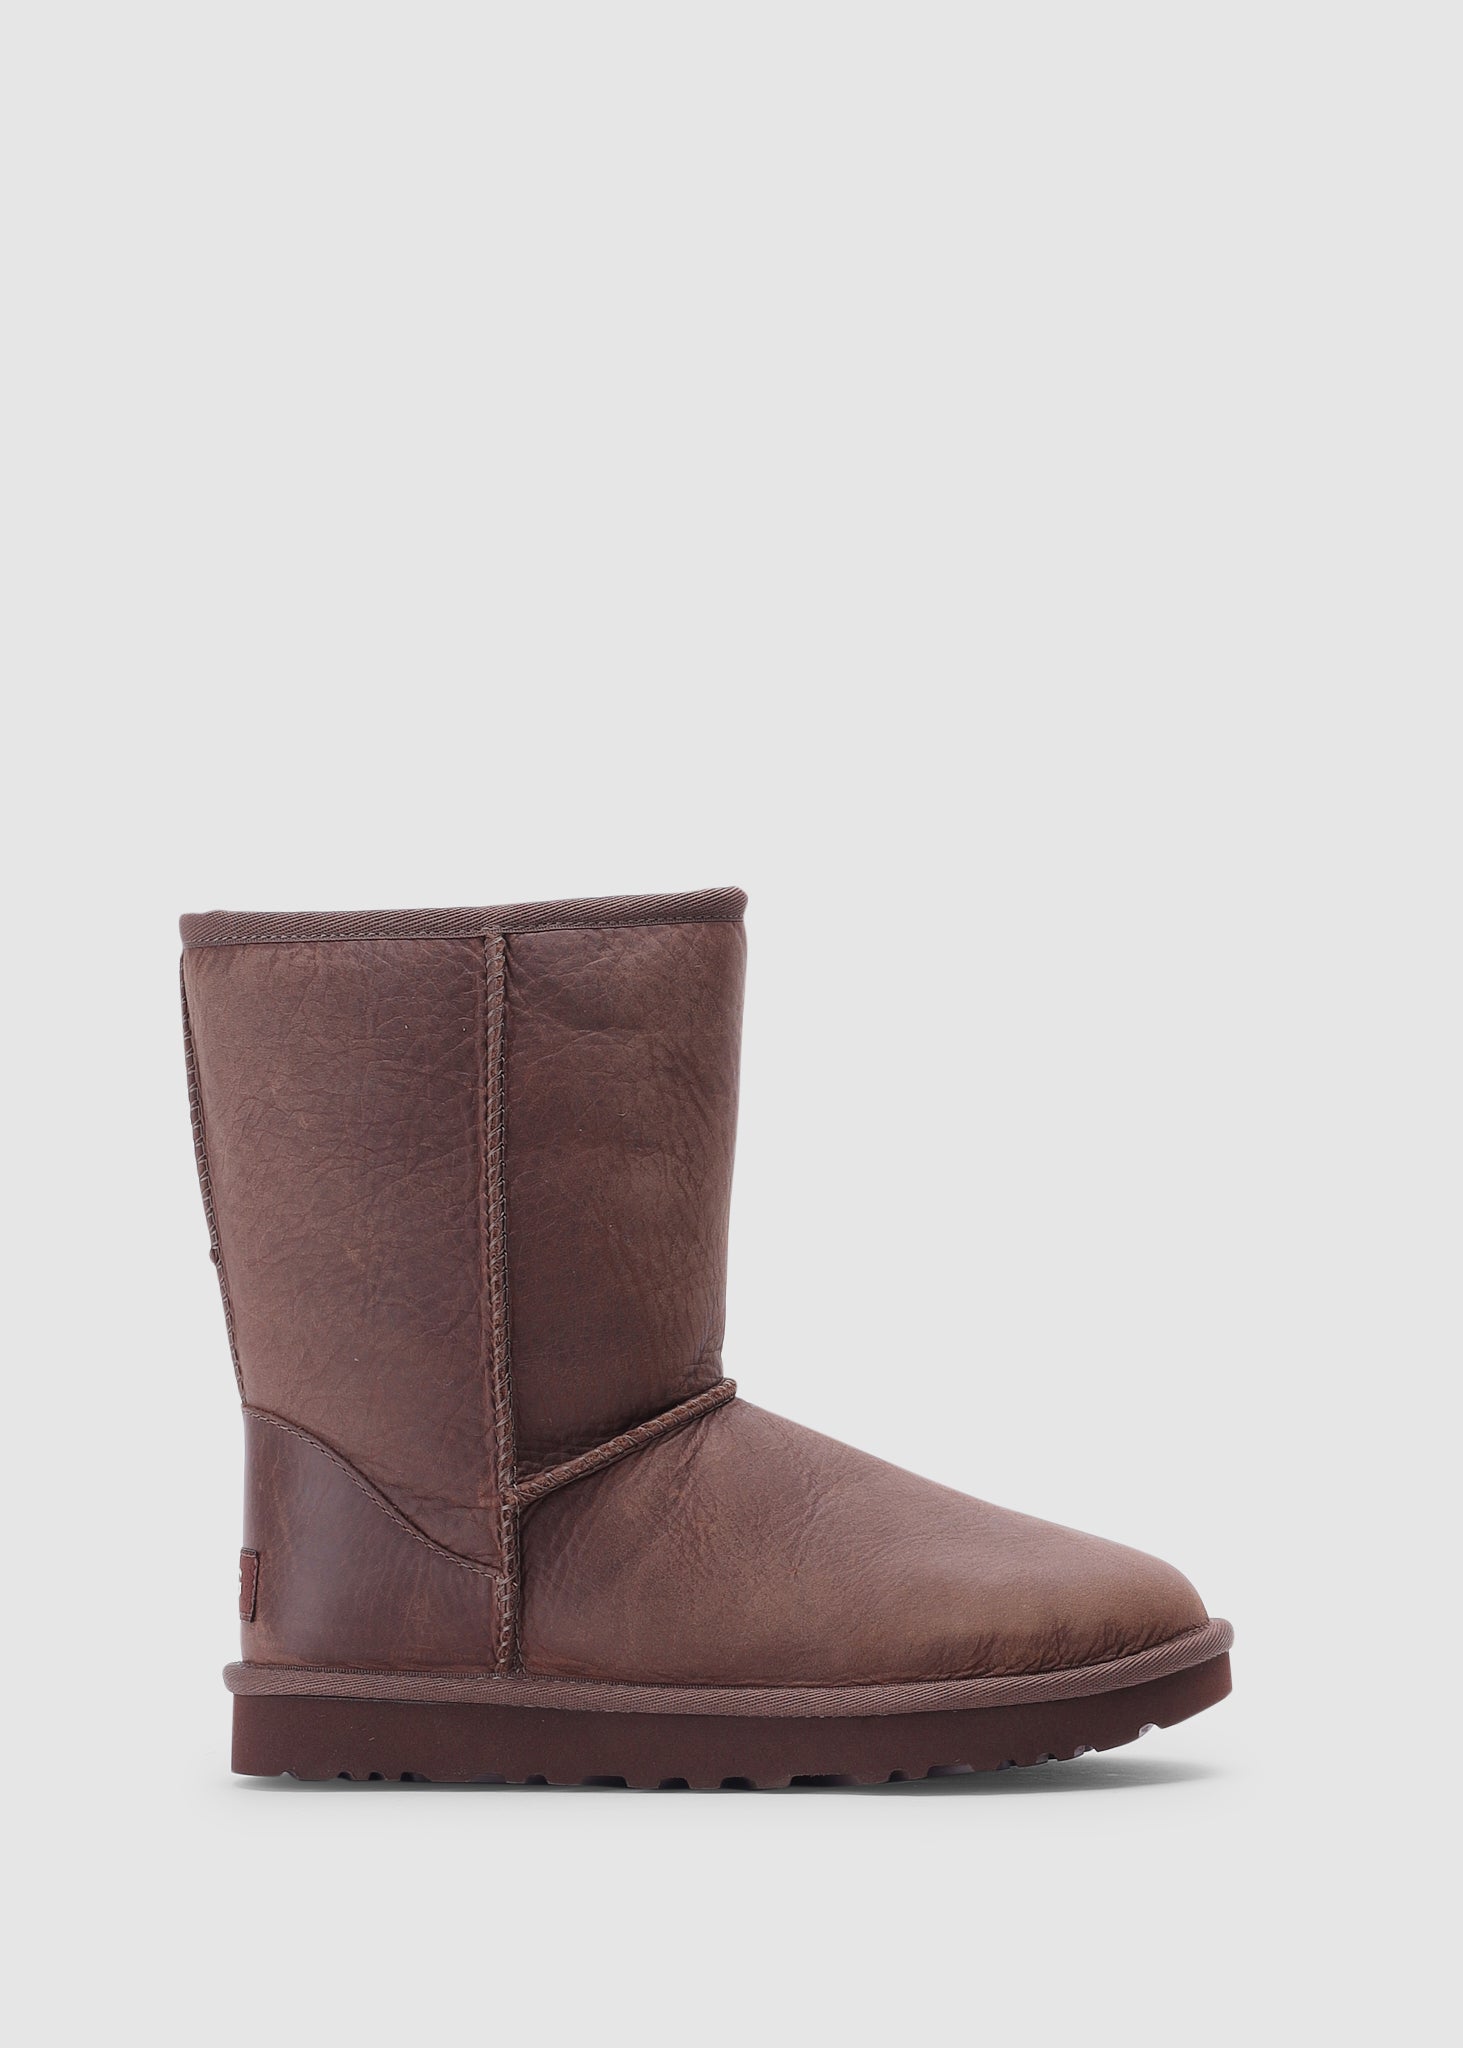 Ugg Womens Classic Short Leather Boots In Brownstone - Brown